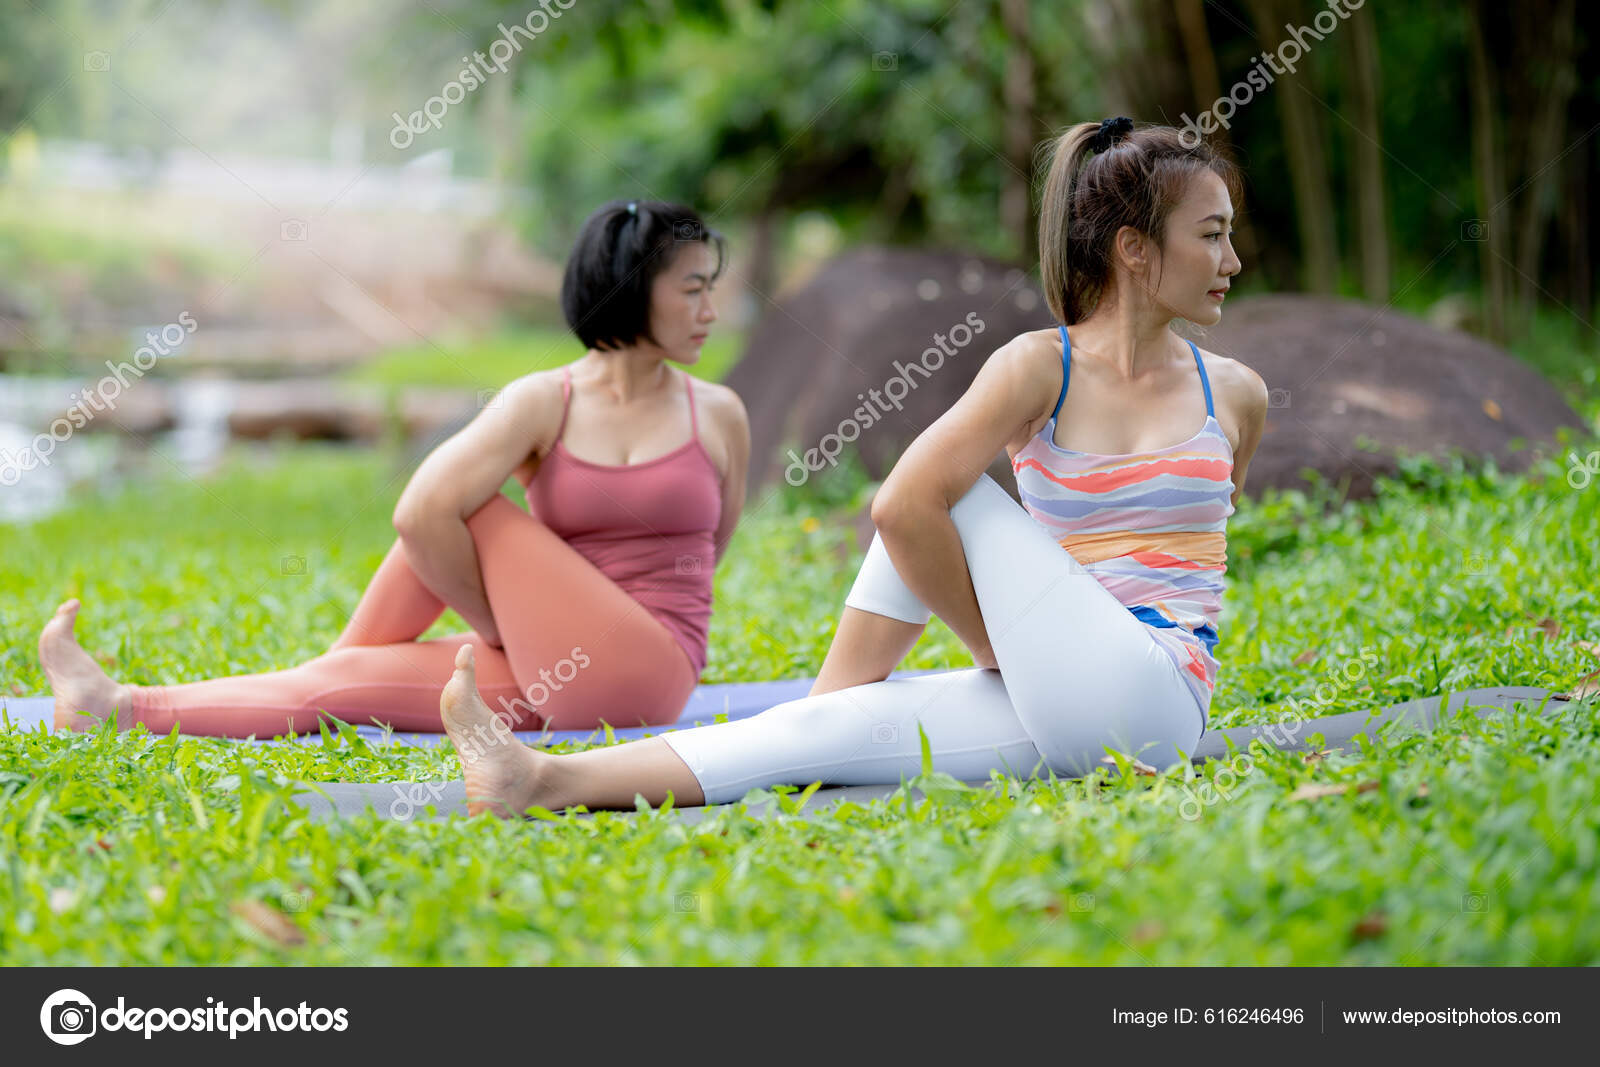 Nearly Impossible Yoga Poses | Advanced Yoga Positions for Experts